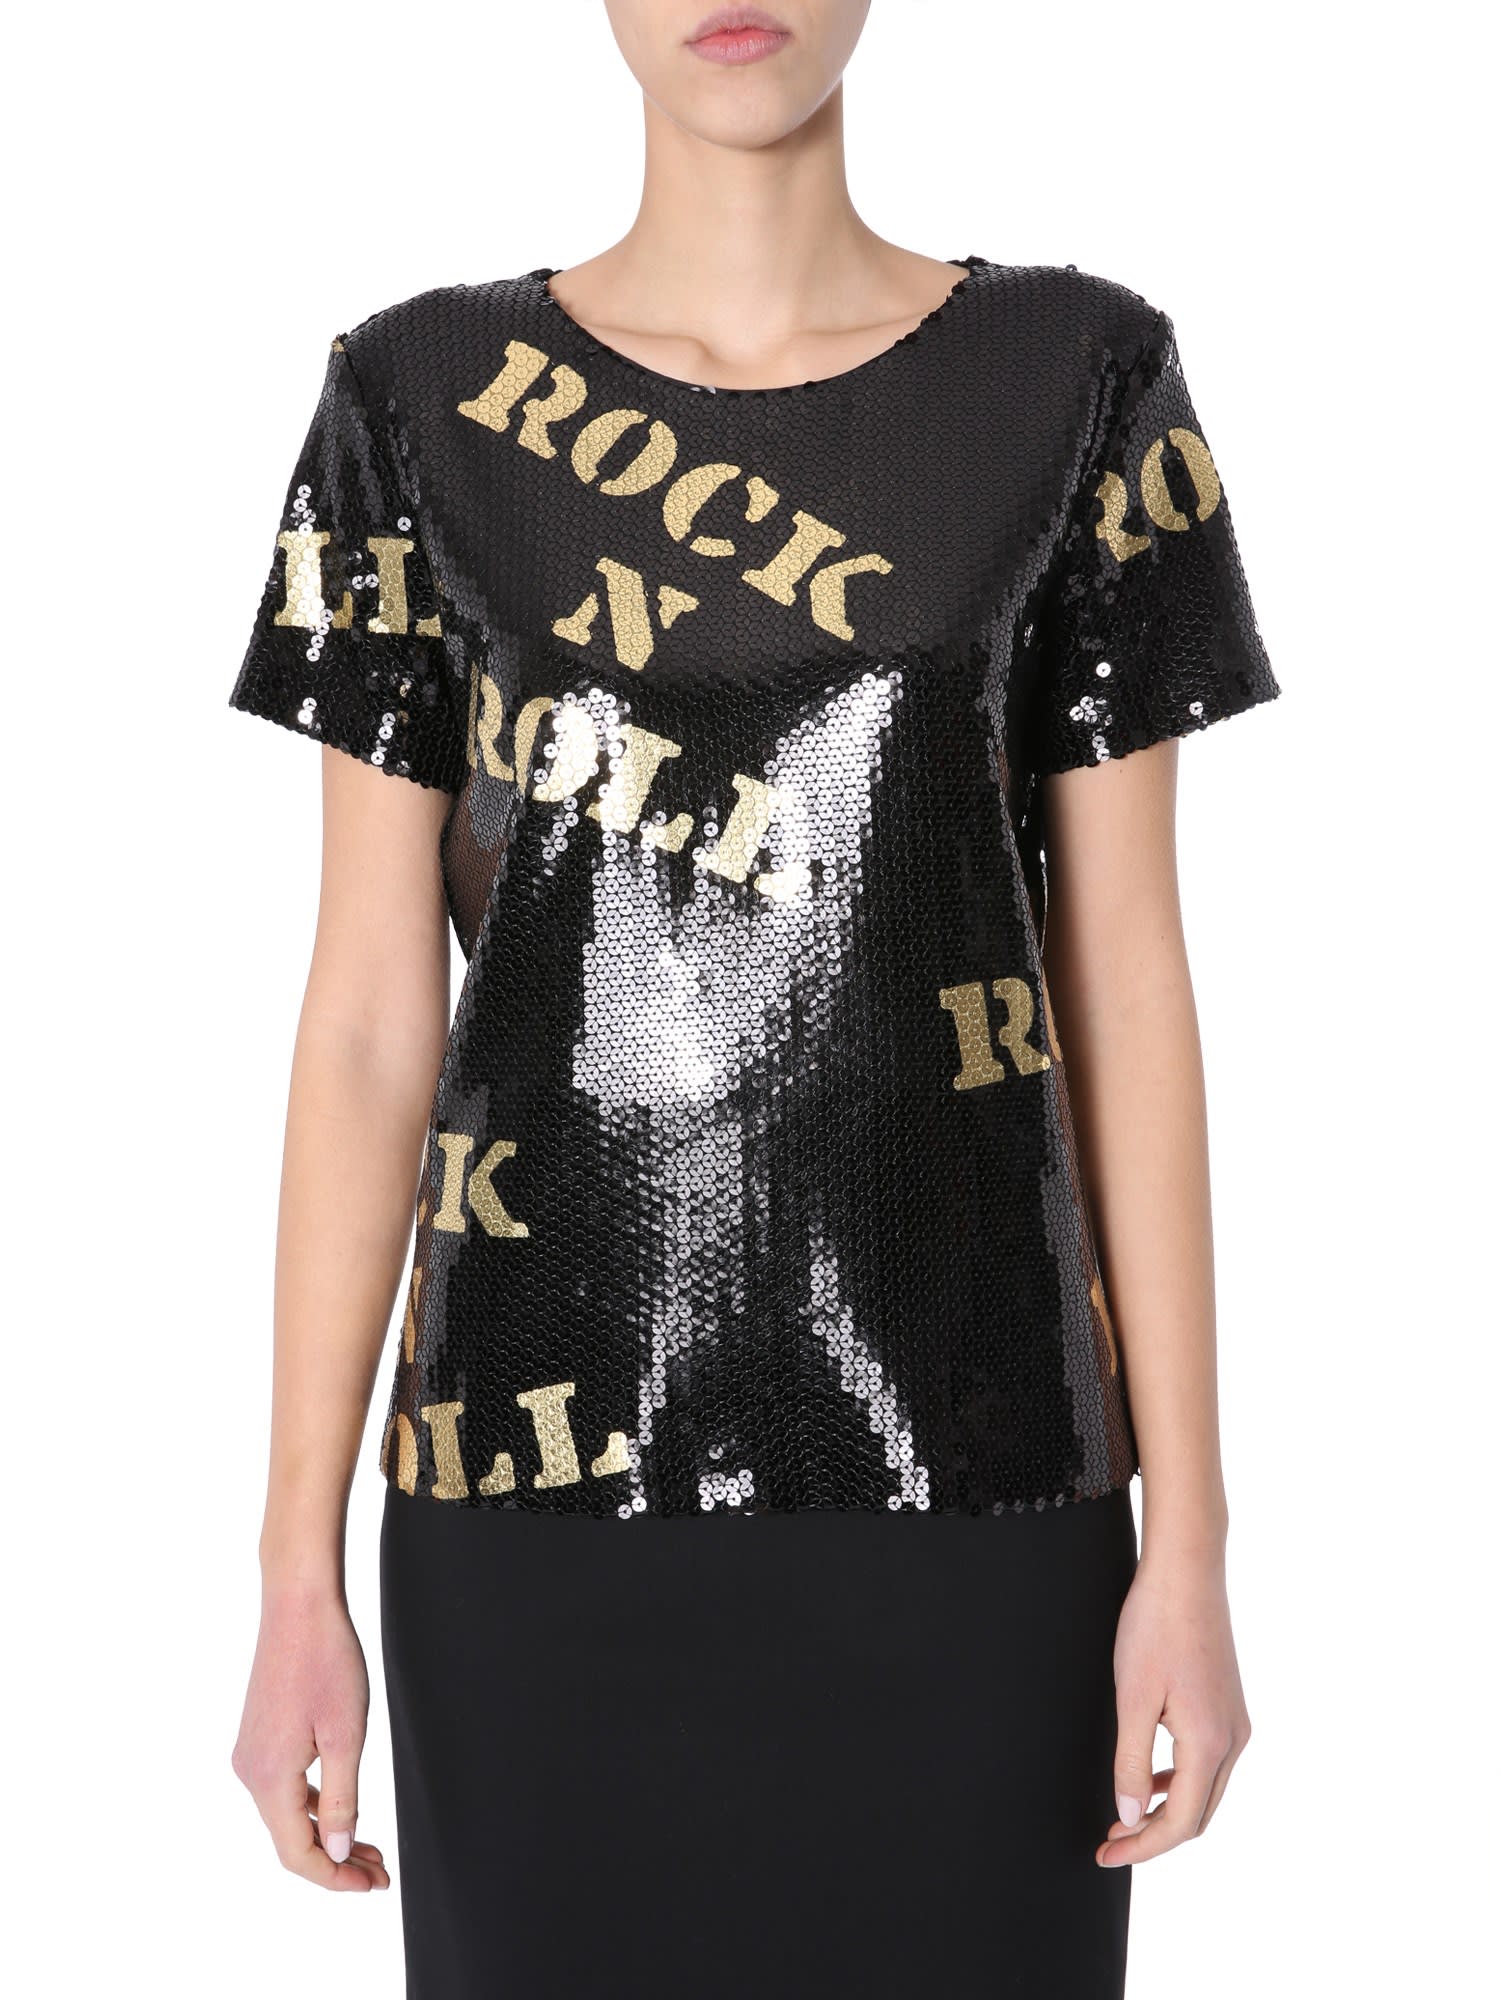 MOSCHINO T-SHIRT WITH SEQUINS,02250546 1555